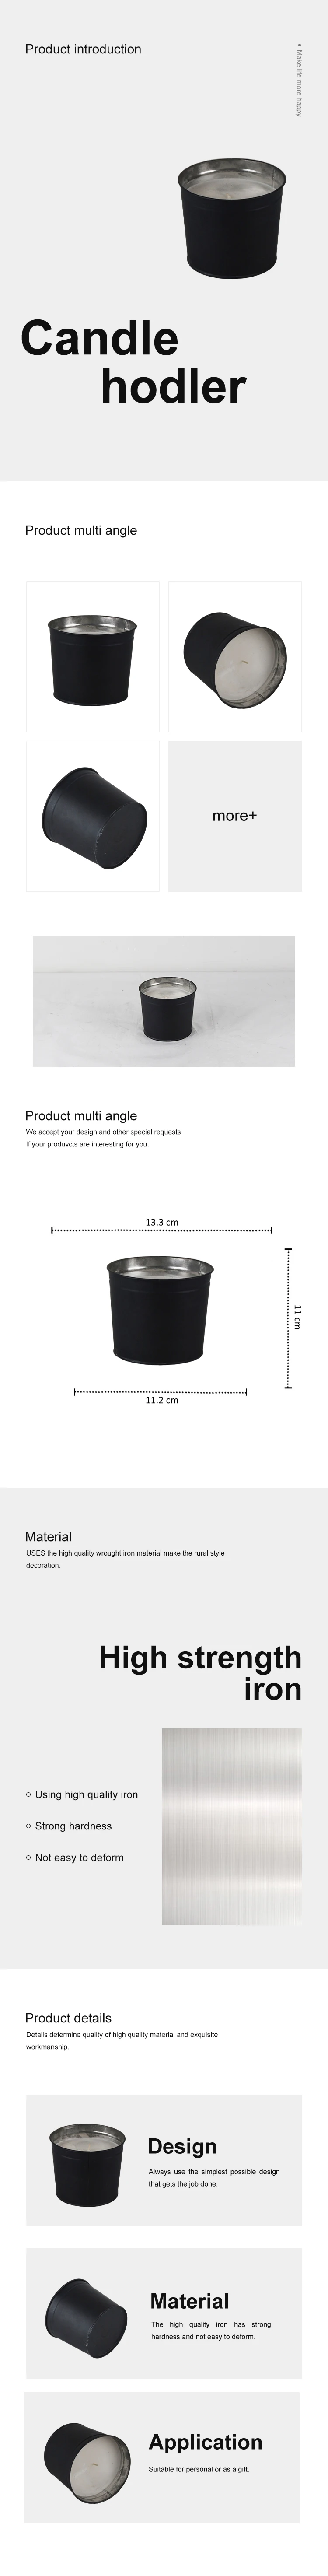 Metal Buckets with Handle Small Iron Pail for Party Black candle Bucket Plant Candy Bars Crafts Vase Favor Mini Toy Container